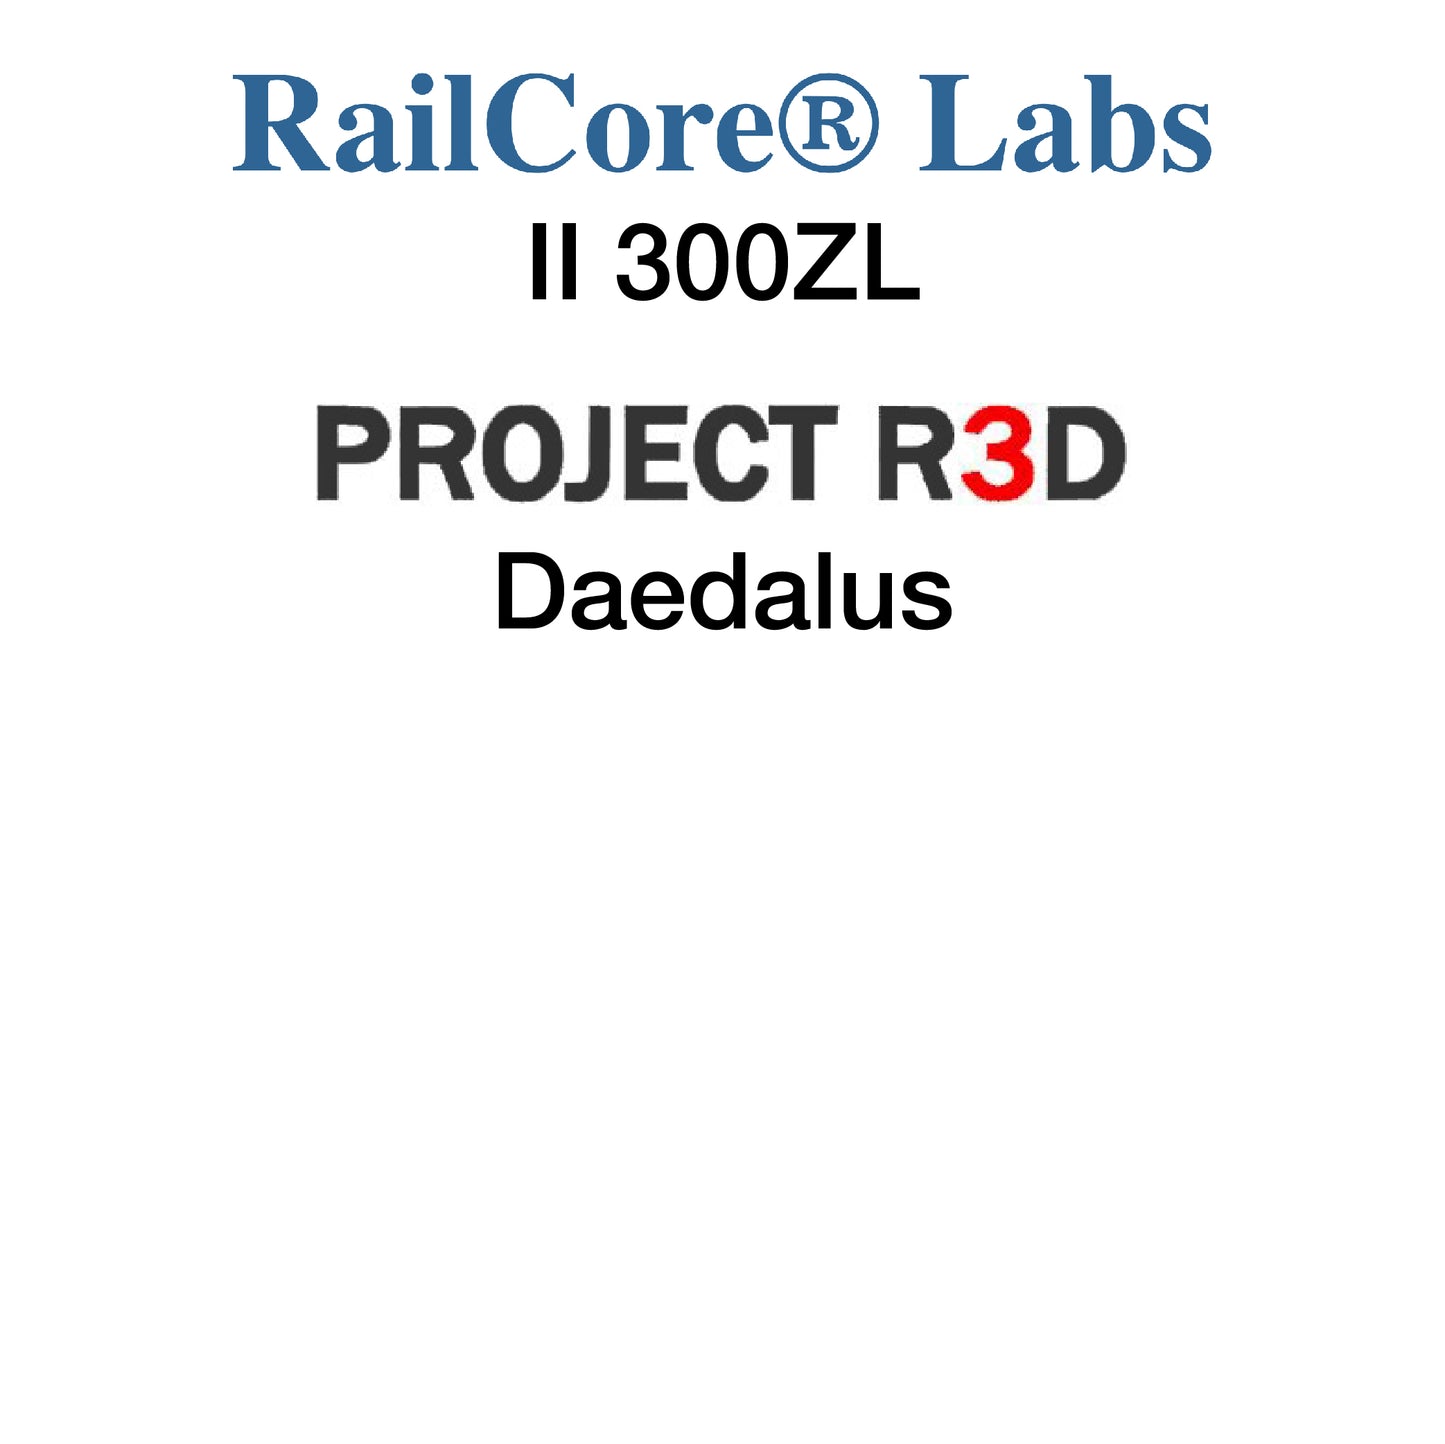 Kit with PEX - Daedalus and RailCore Labs II 300ZL - 340 x 325